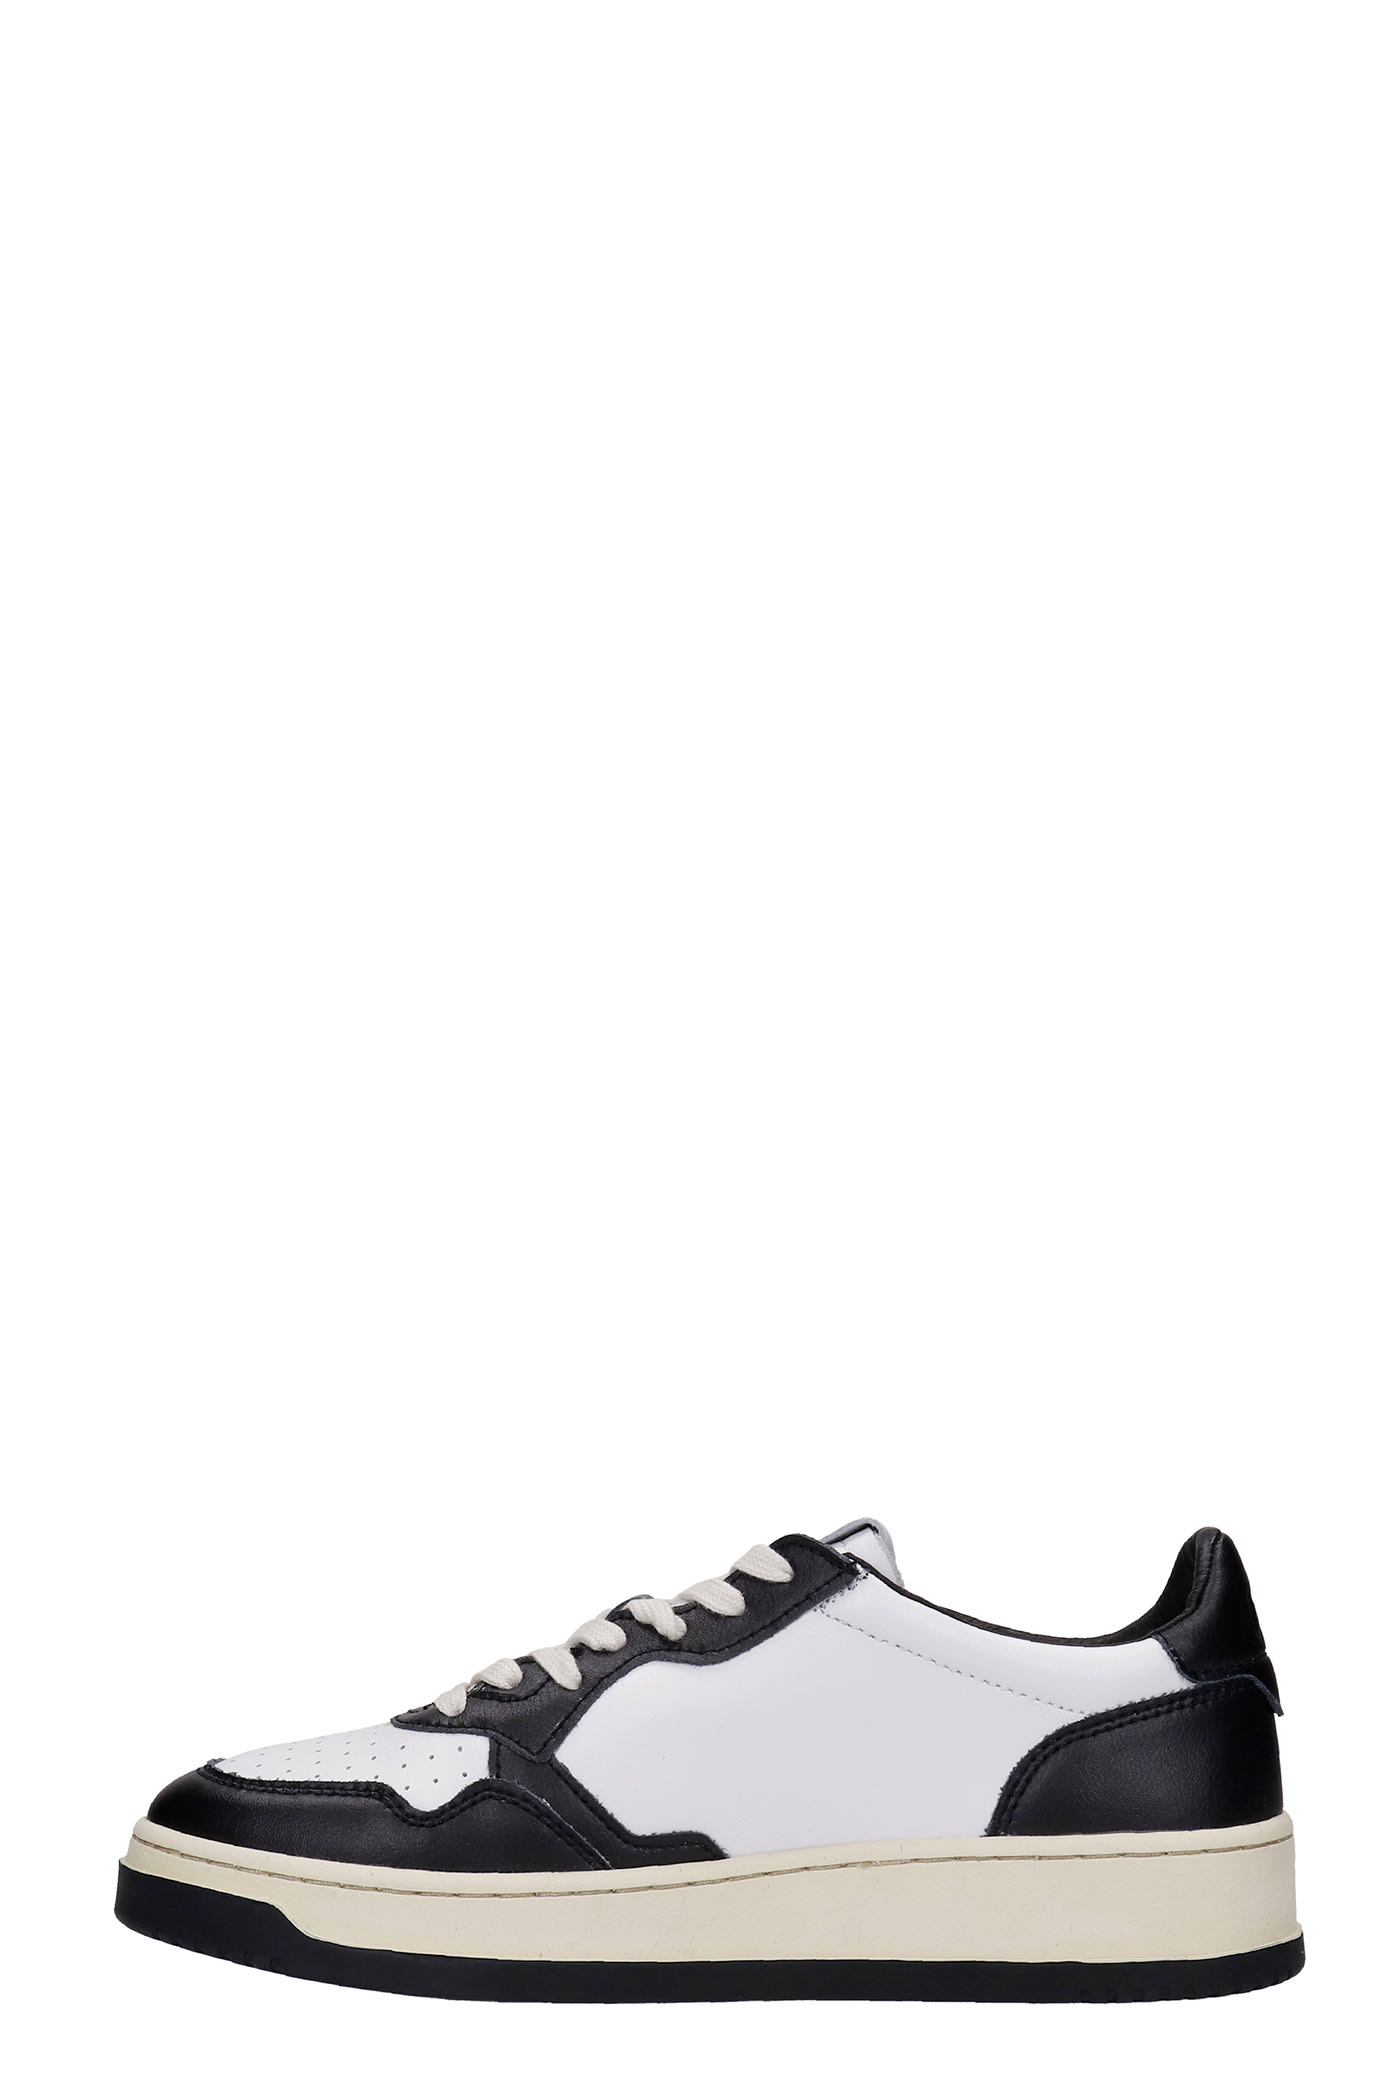 Shop Autry 01 Sneakers In White Leather In White/black